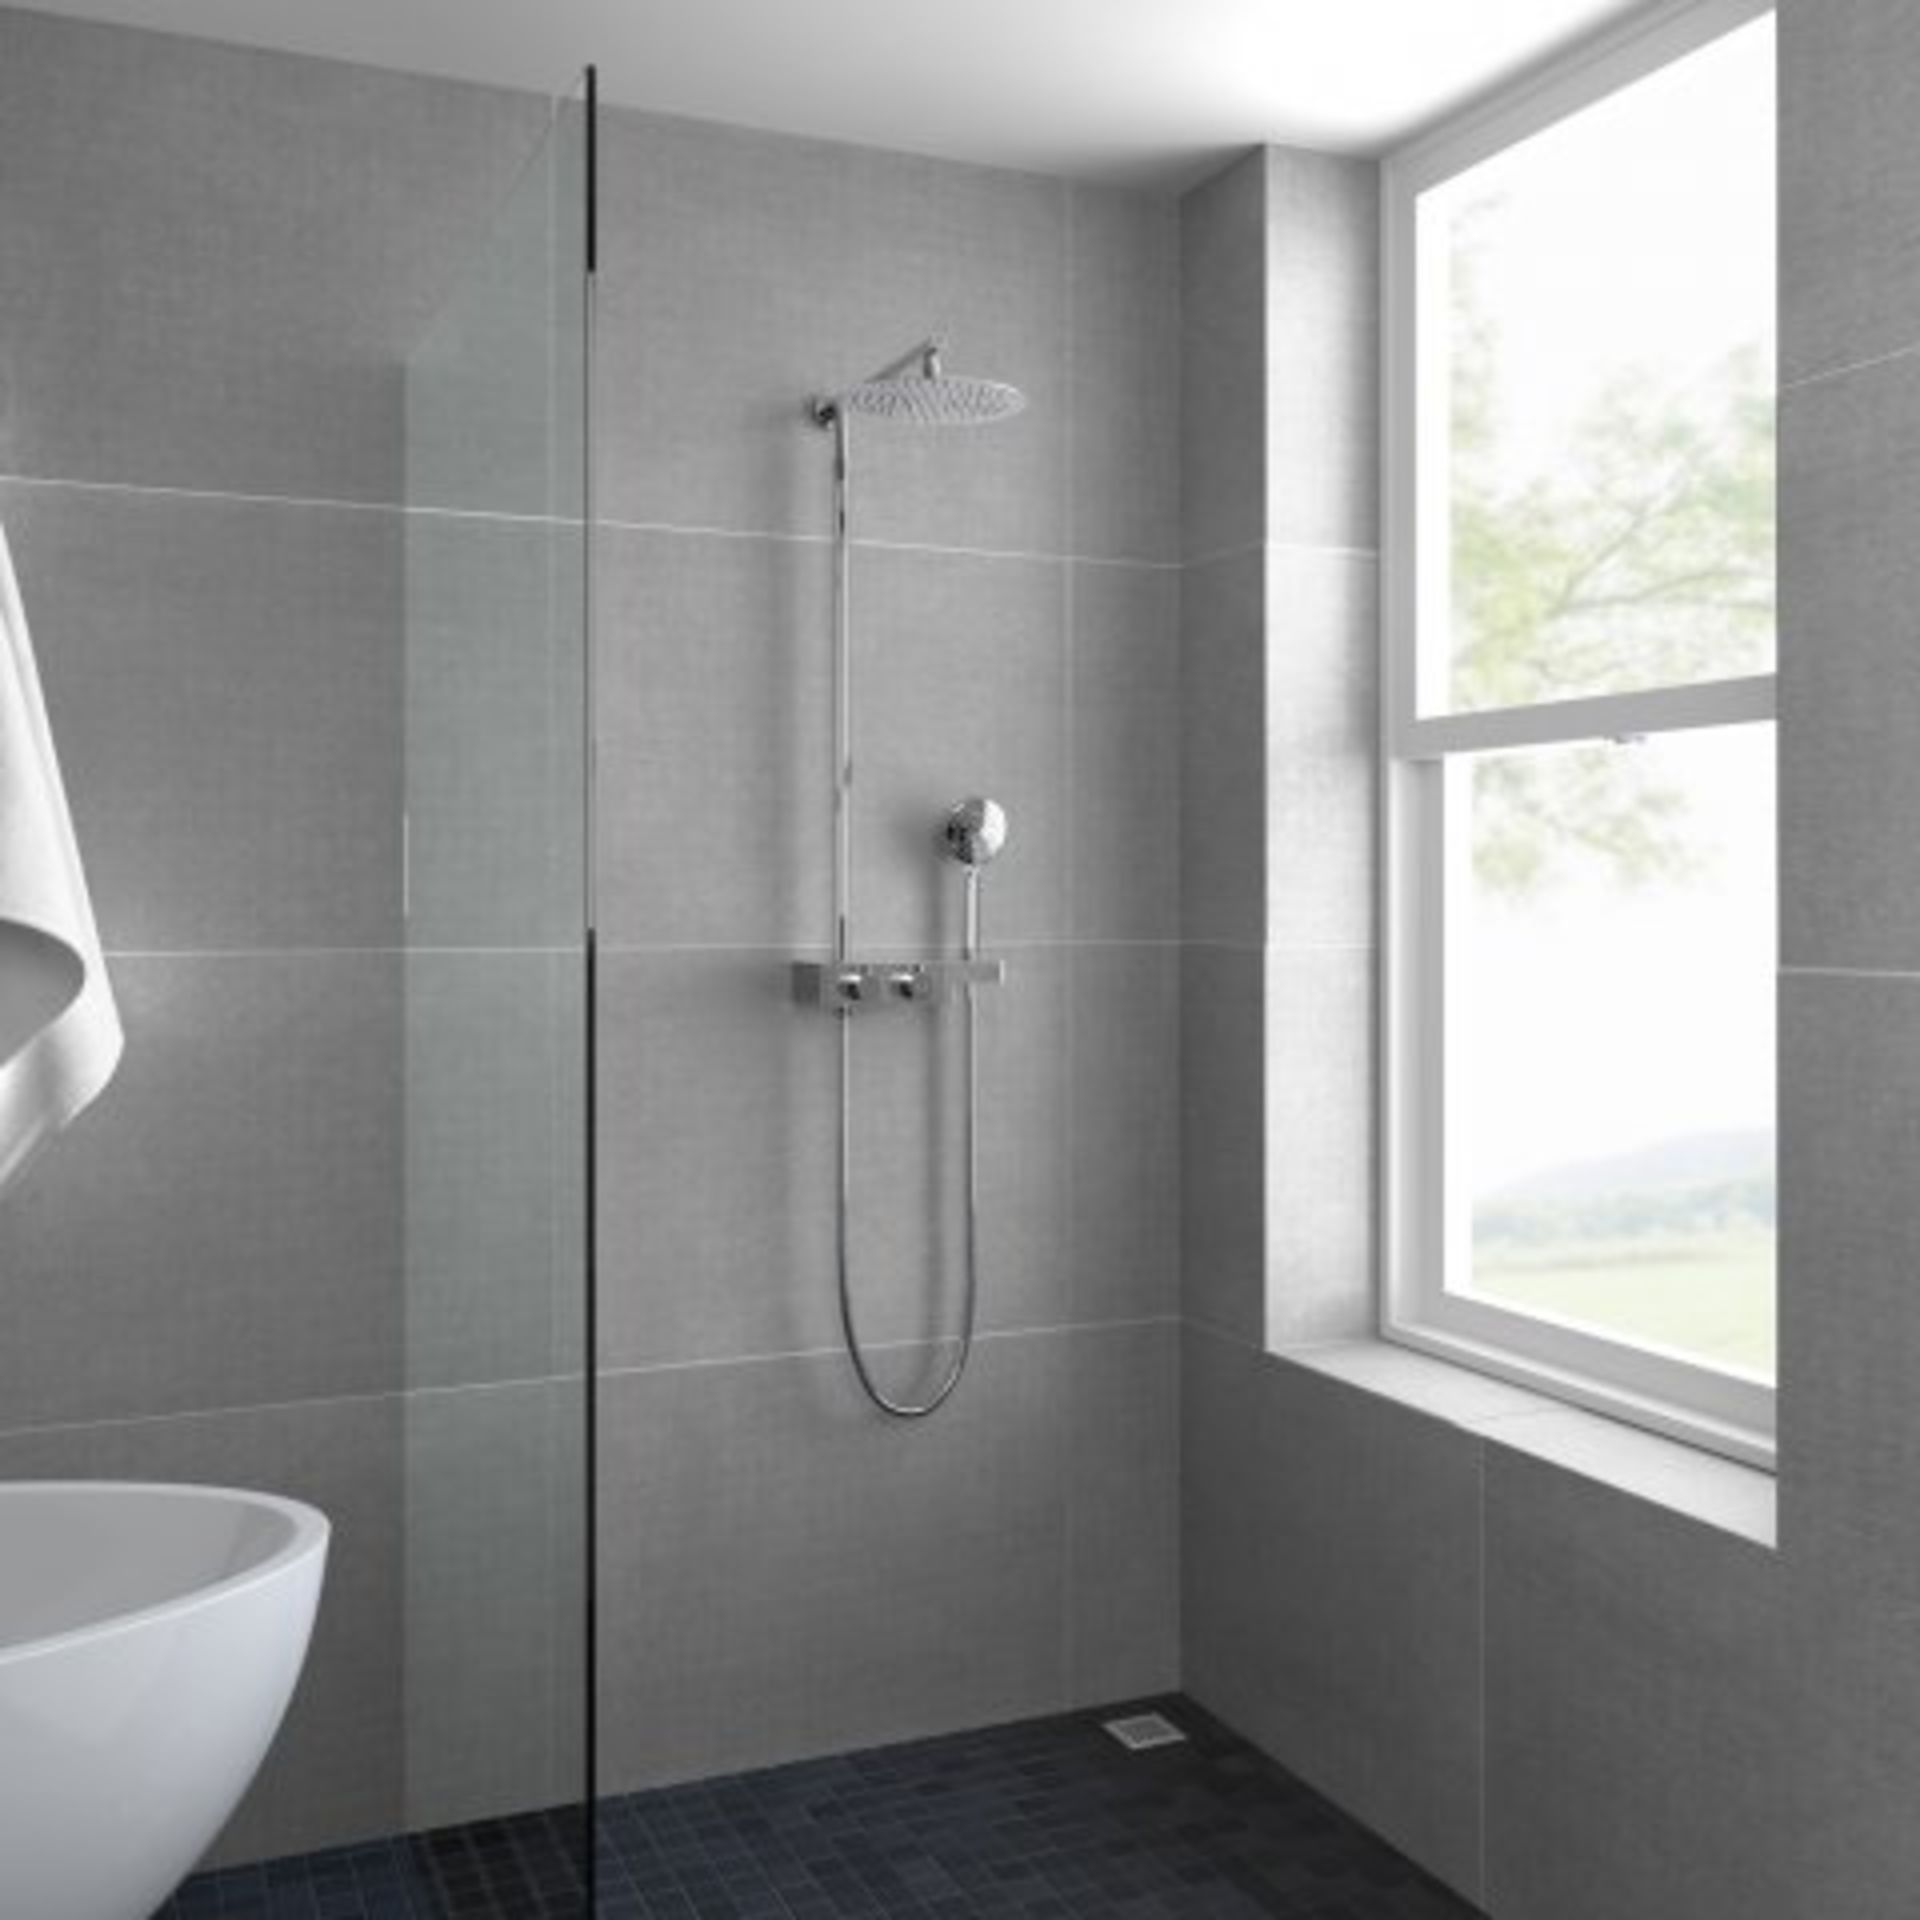 (V89) Round Exposed Thermostatic Mixer Shower Kit & Large Shower Head Designer Style Our - Image 4 of 7